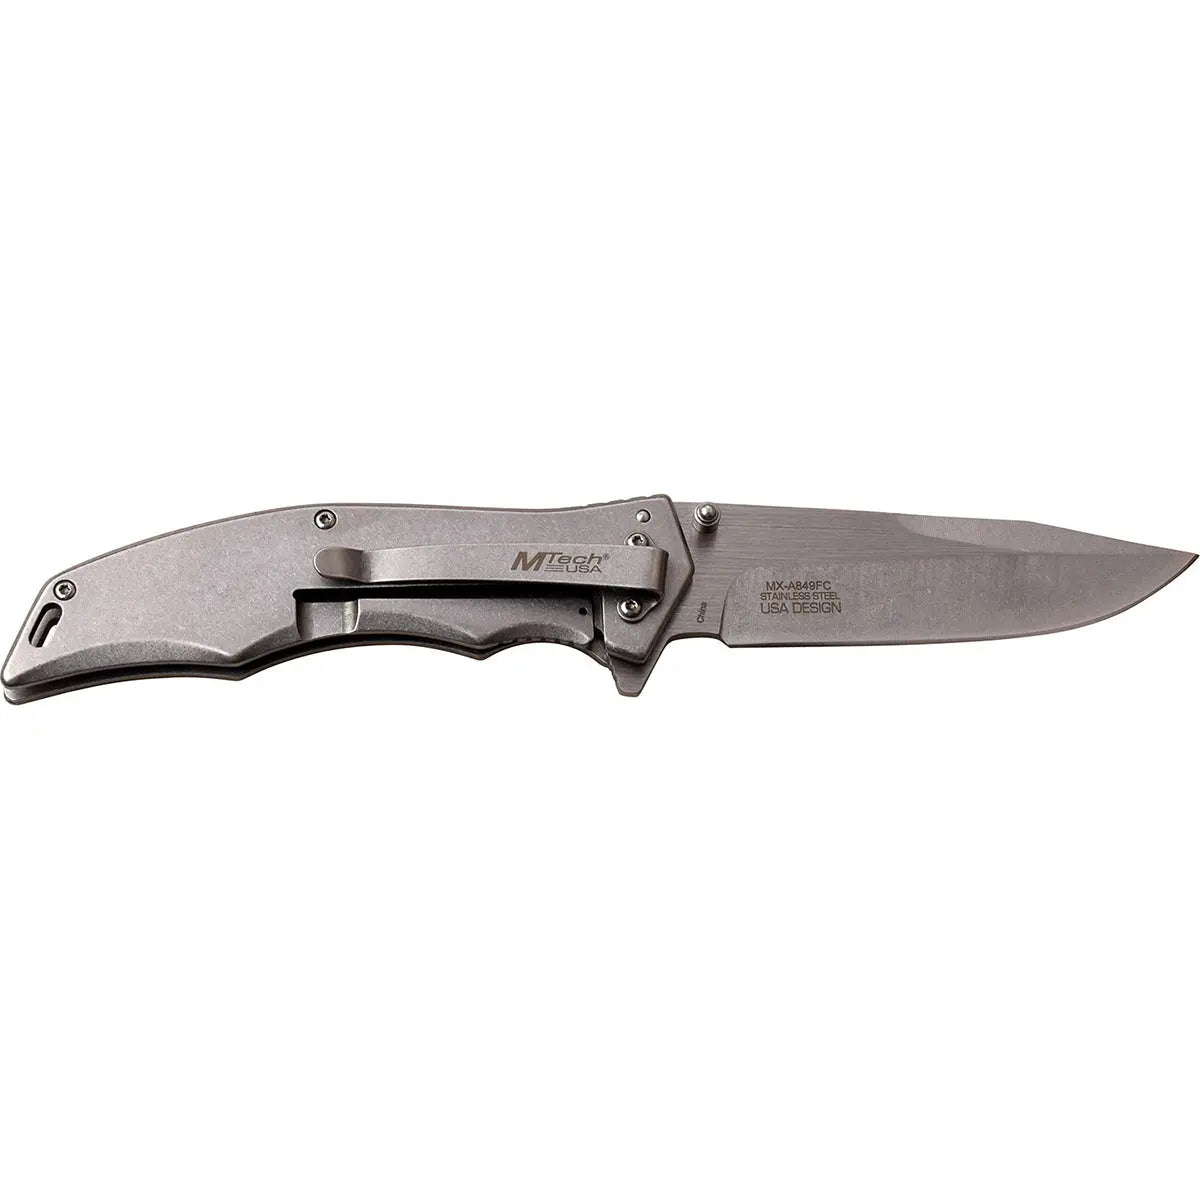 MTech USA Xtreme Spring Assisted Folding Knife, We The People, Brown, MX-A849FC M-Tech